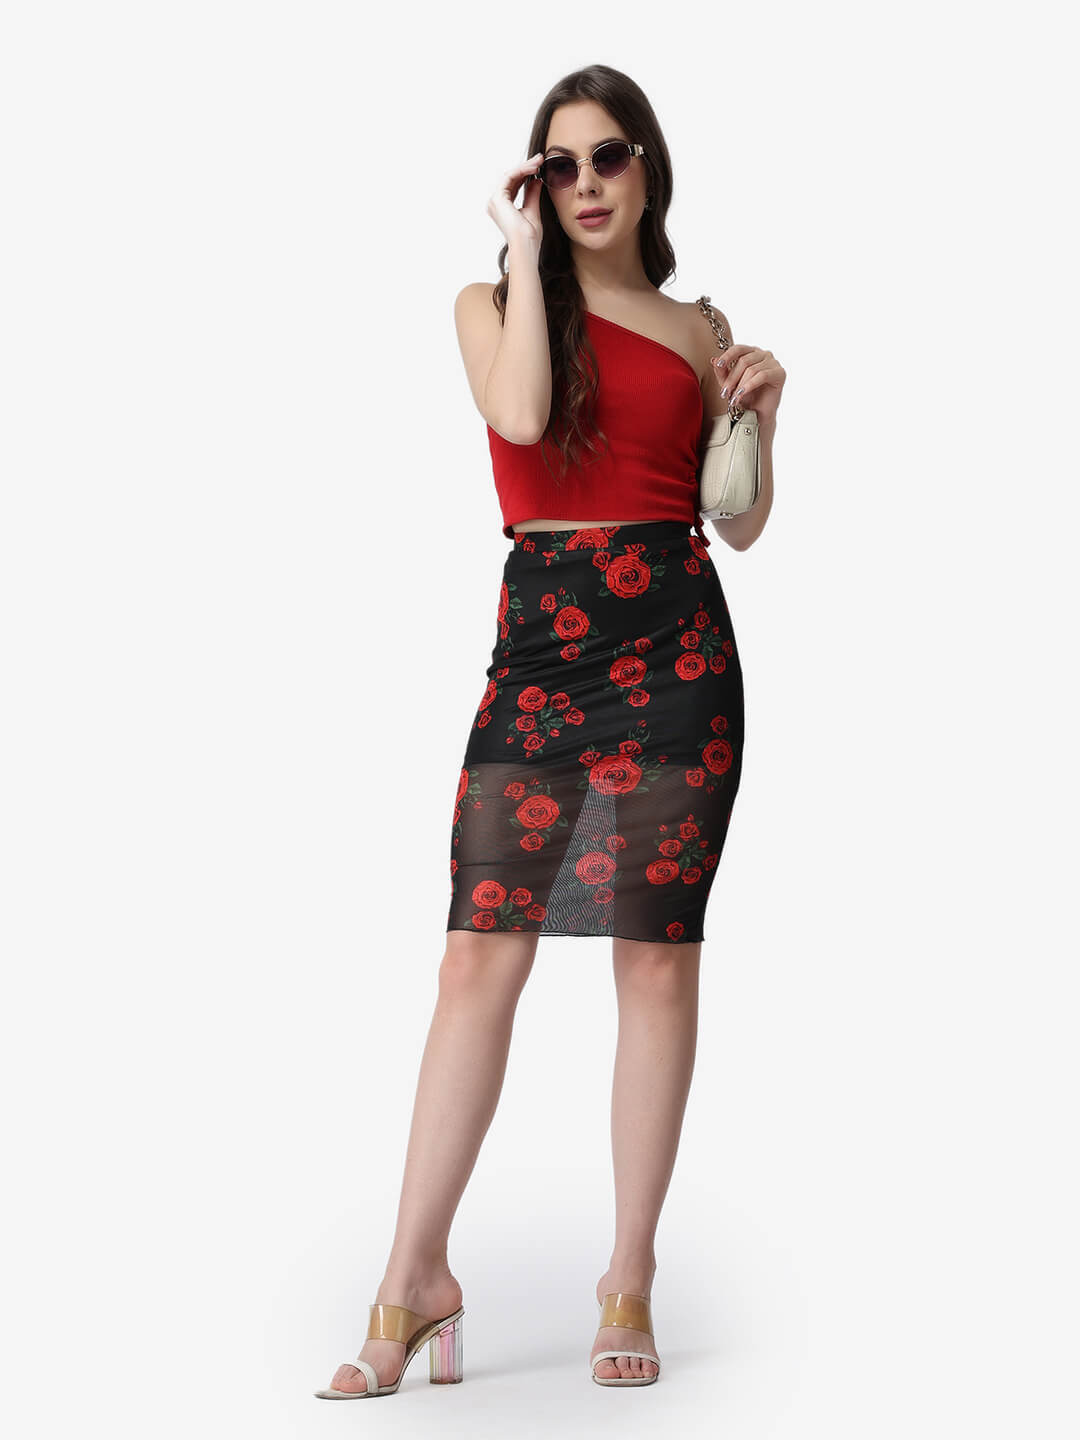 Women Casual Black Floral Printed Sheer with Lining Knee Length Pencil Skirt